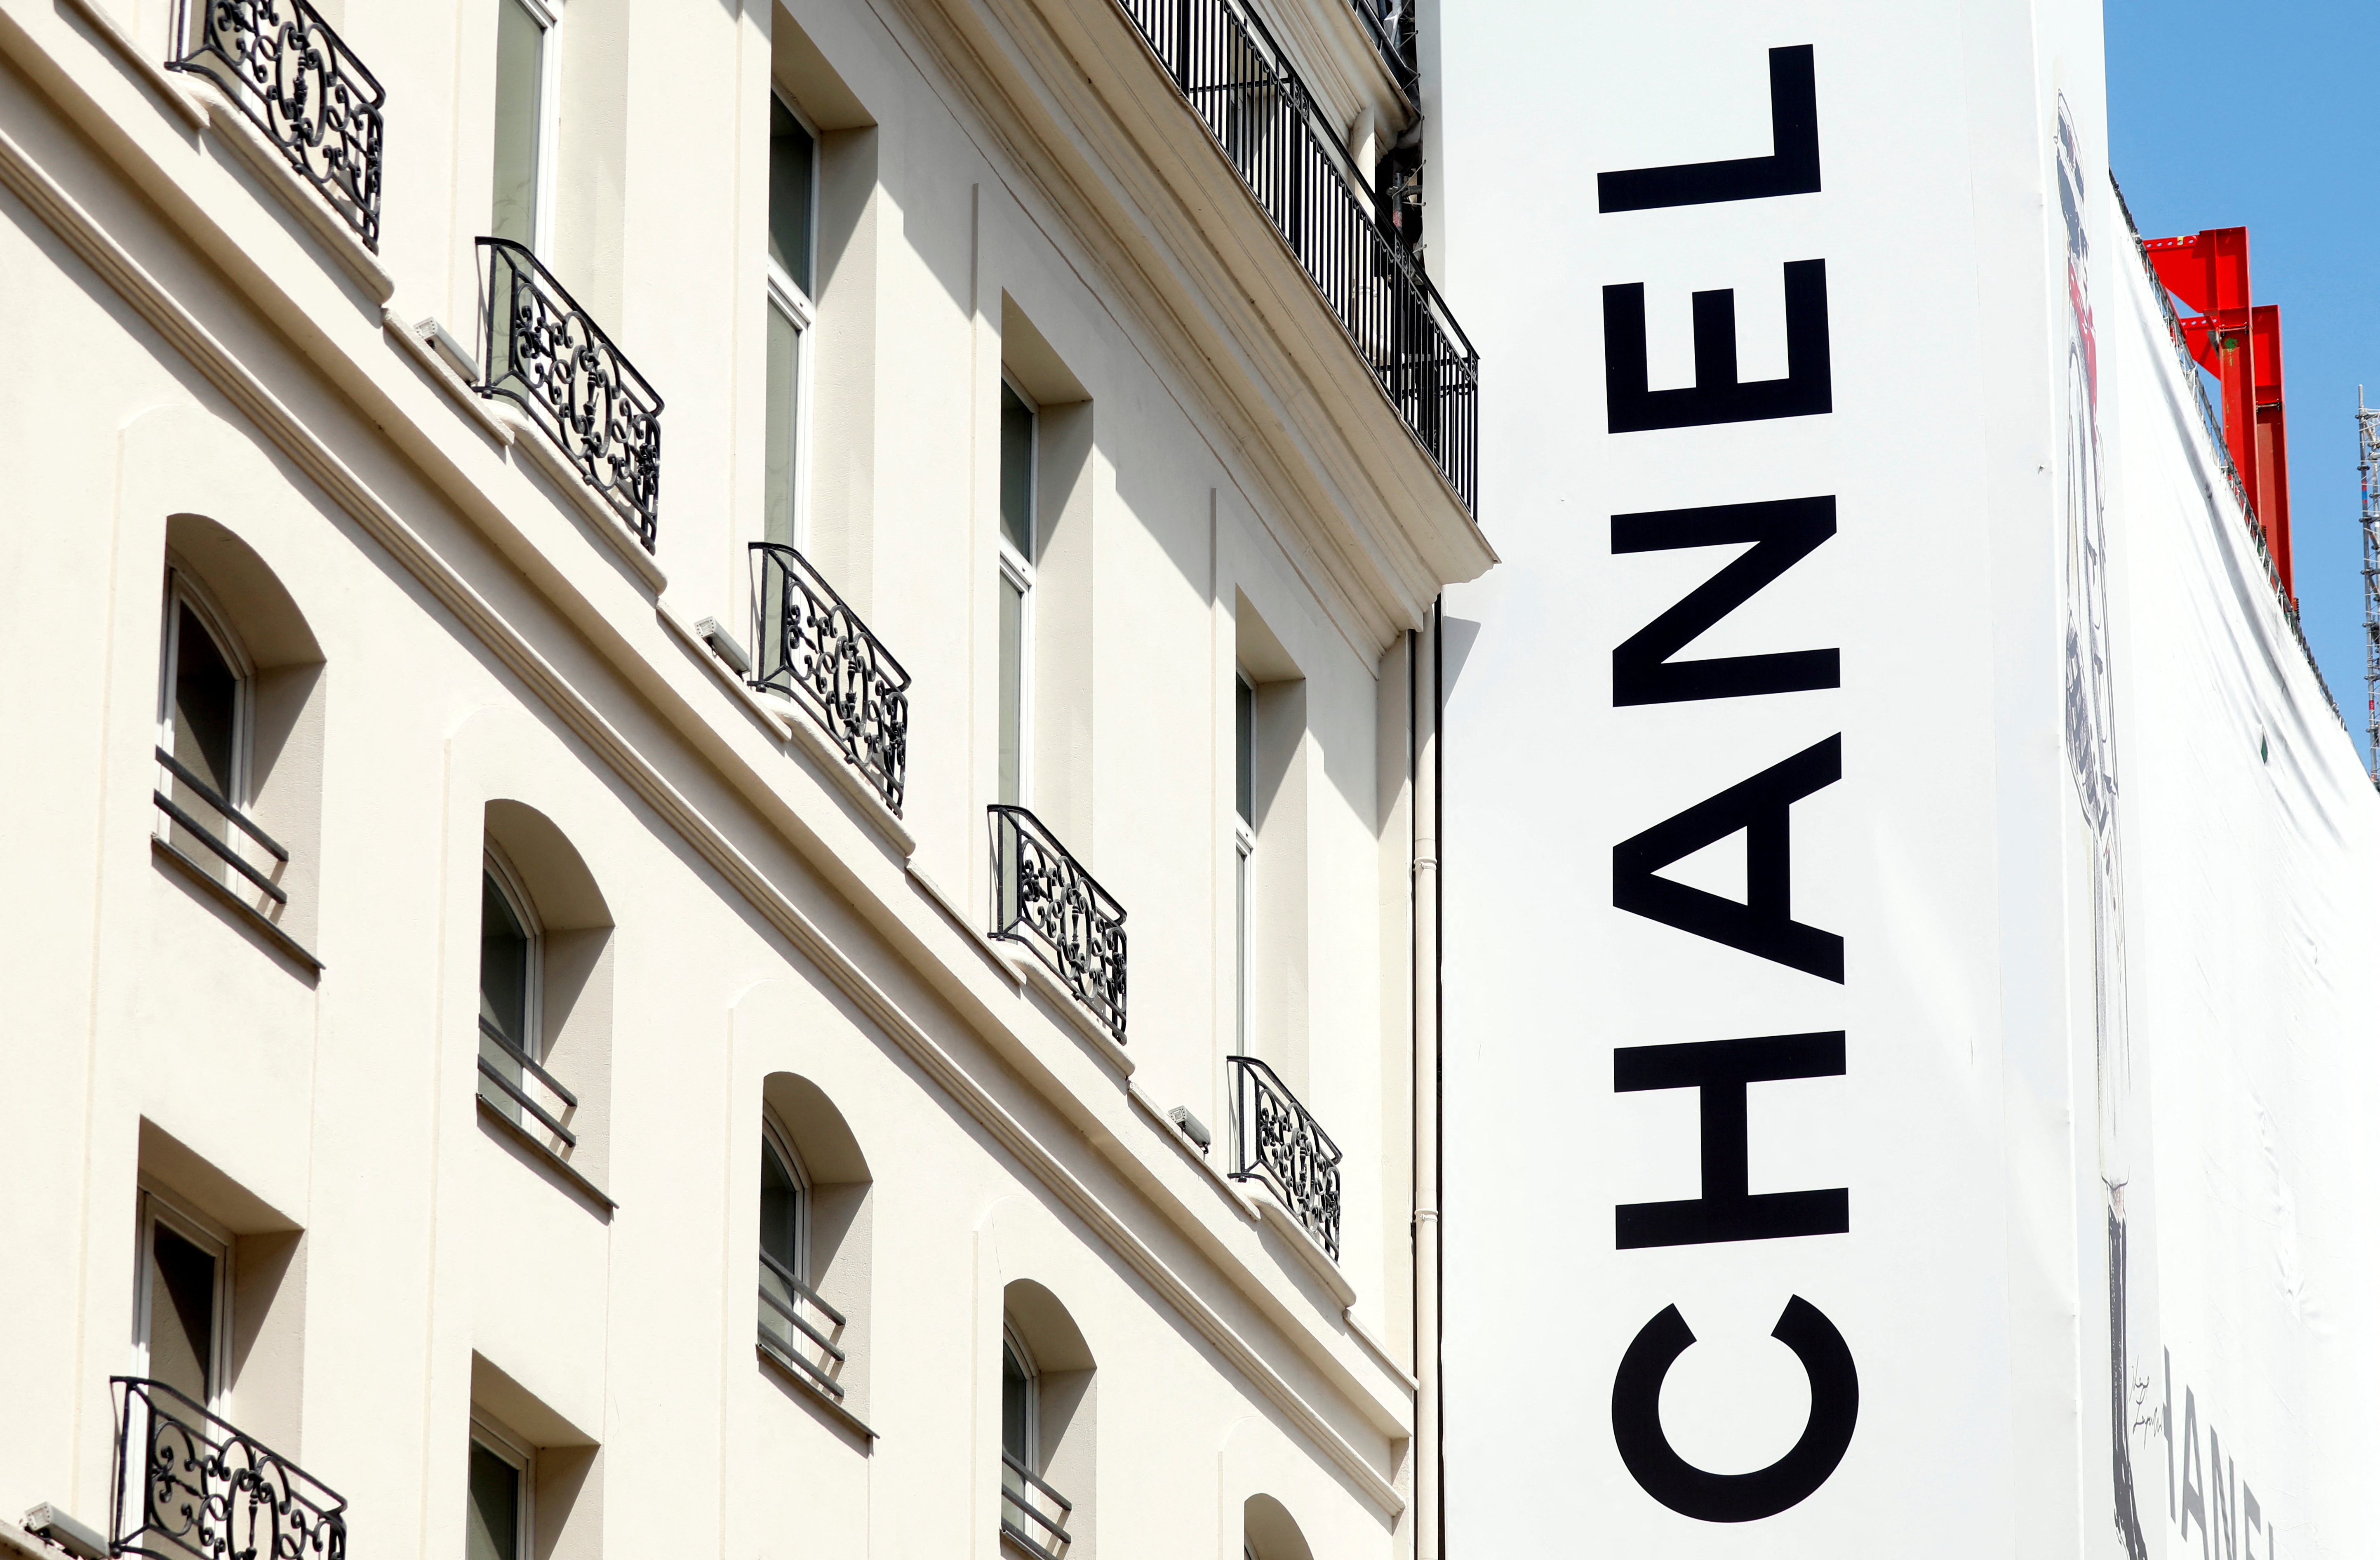 The logo of fashion house Chanel is seen on a store in Paris, France, June 18, 2020. REUTERS/Charles Platiau